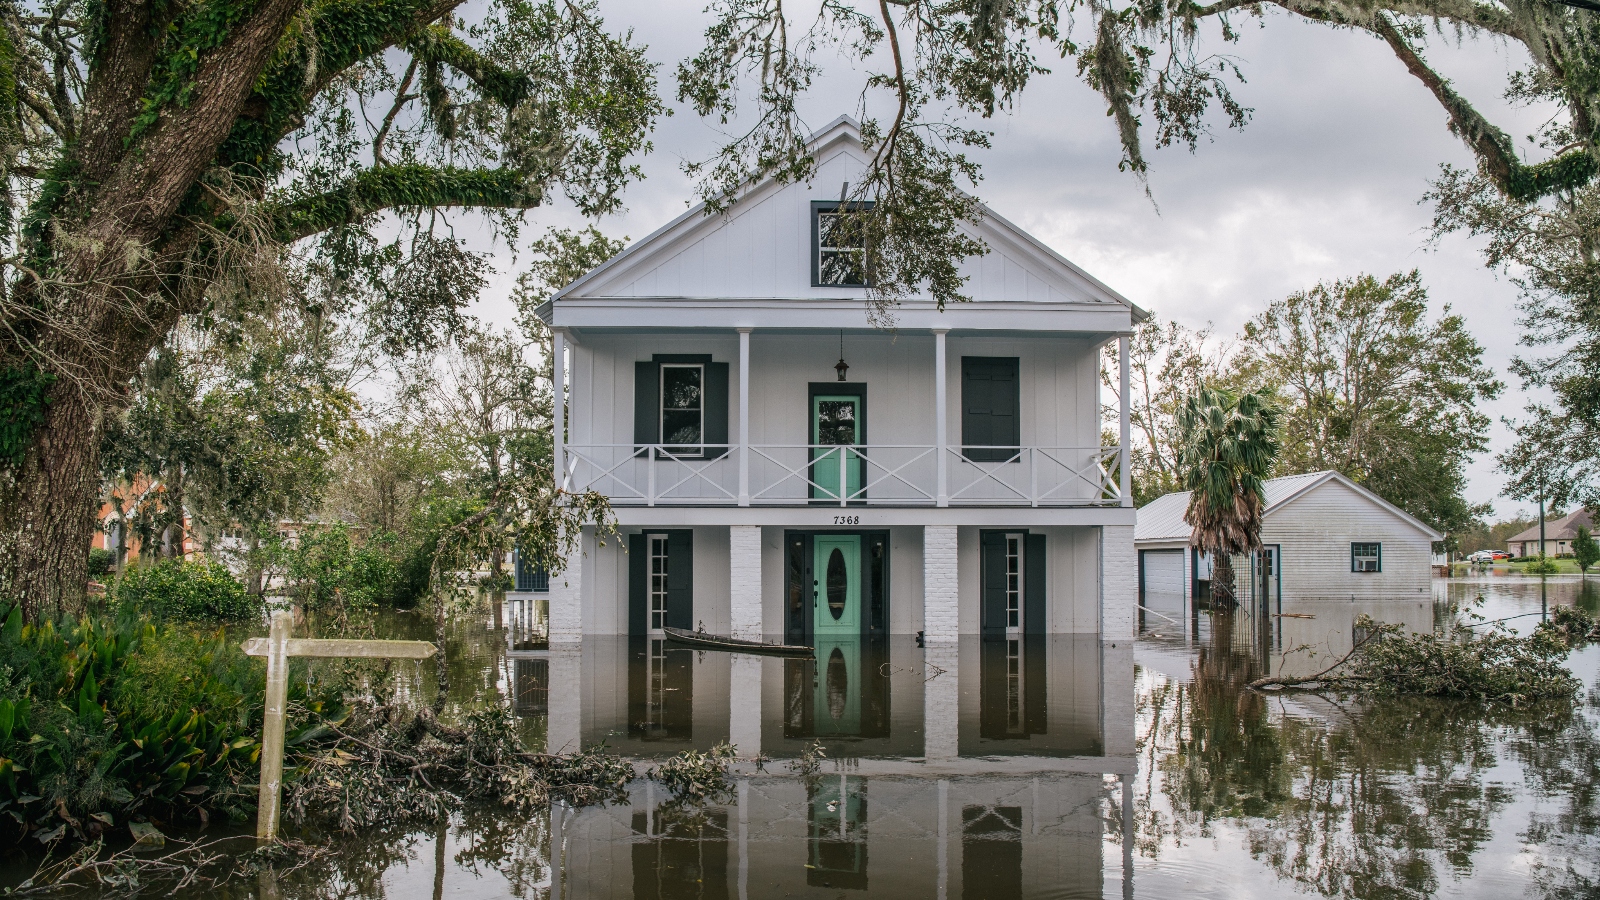 Floodwater surrounds a home on August 31, 2021 in Barataria, Louisiana after Hurricane Ida.